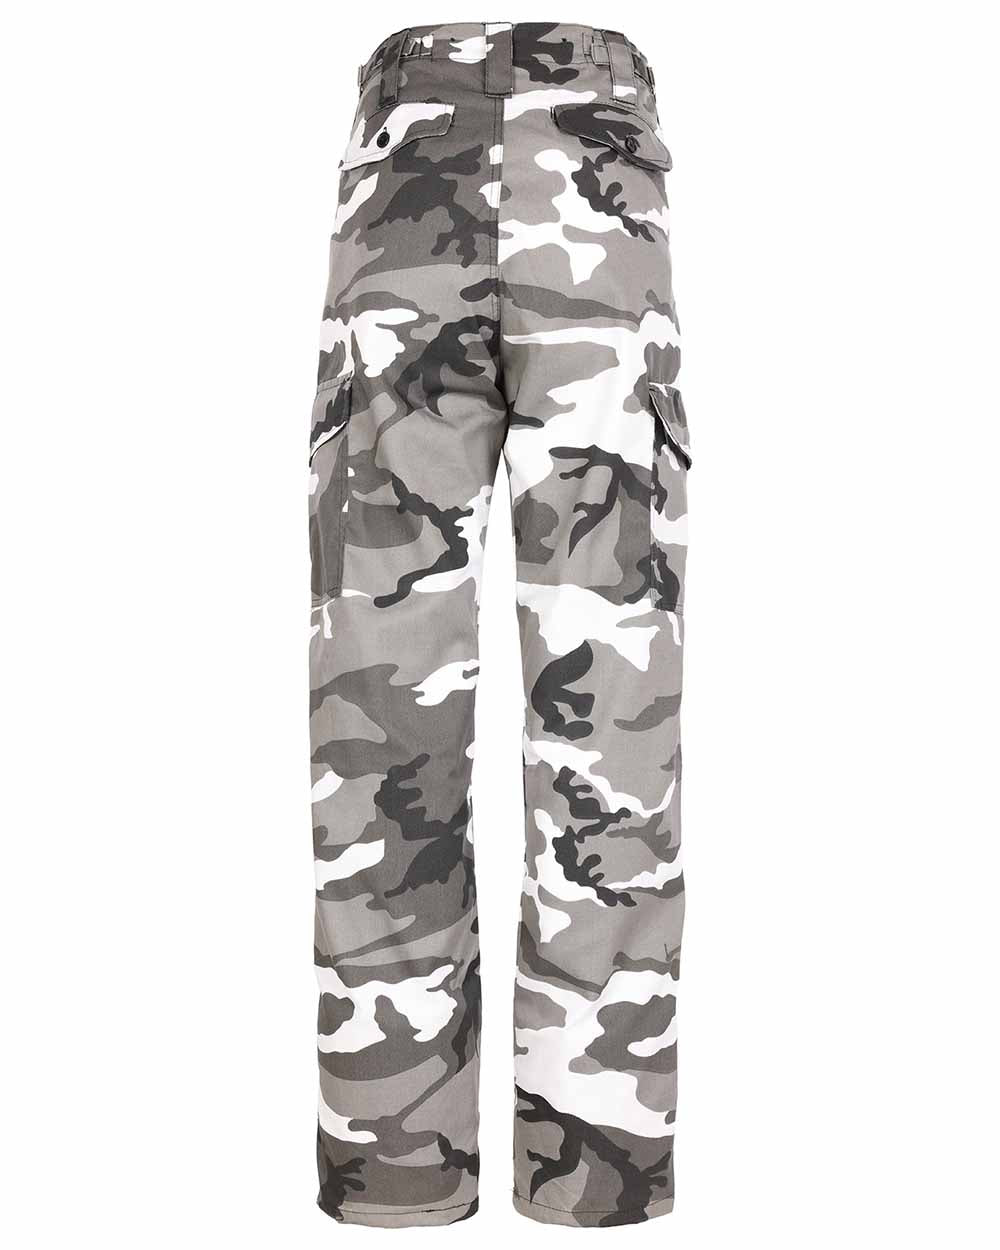 Amazon.com: Urban City Camouflage Poly/Cotton Military BDU Fatigue Pants  with Official ArmyUniverse Pin (X-Small Regular W 23-27 - I 29.5-32.5):  Military Pants: Clothing, Shoes & Jewelry